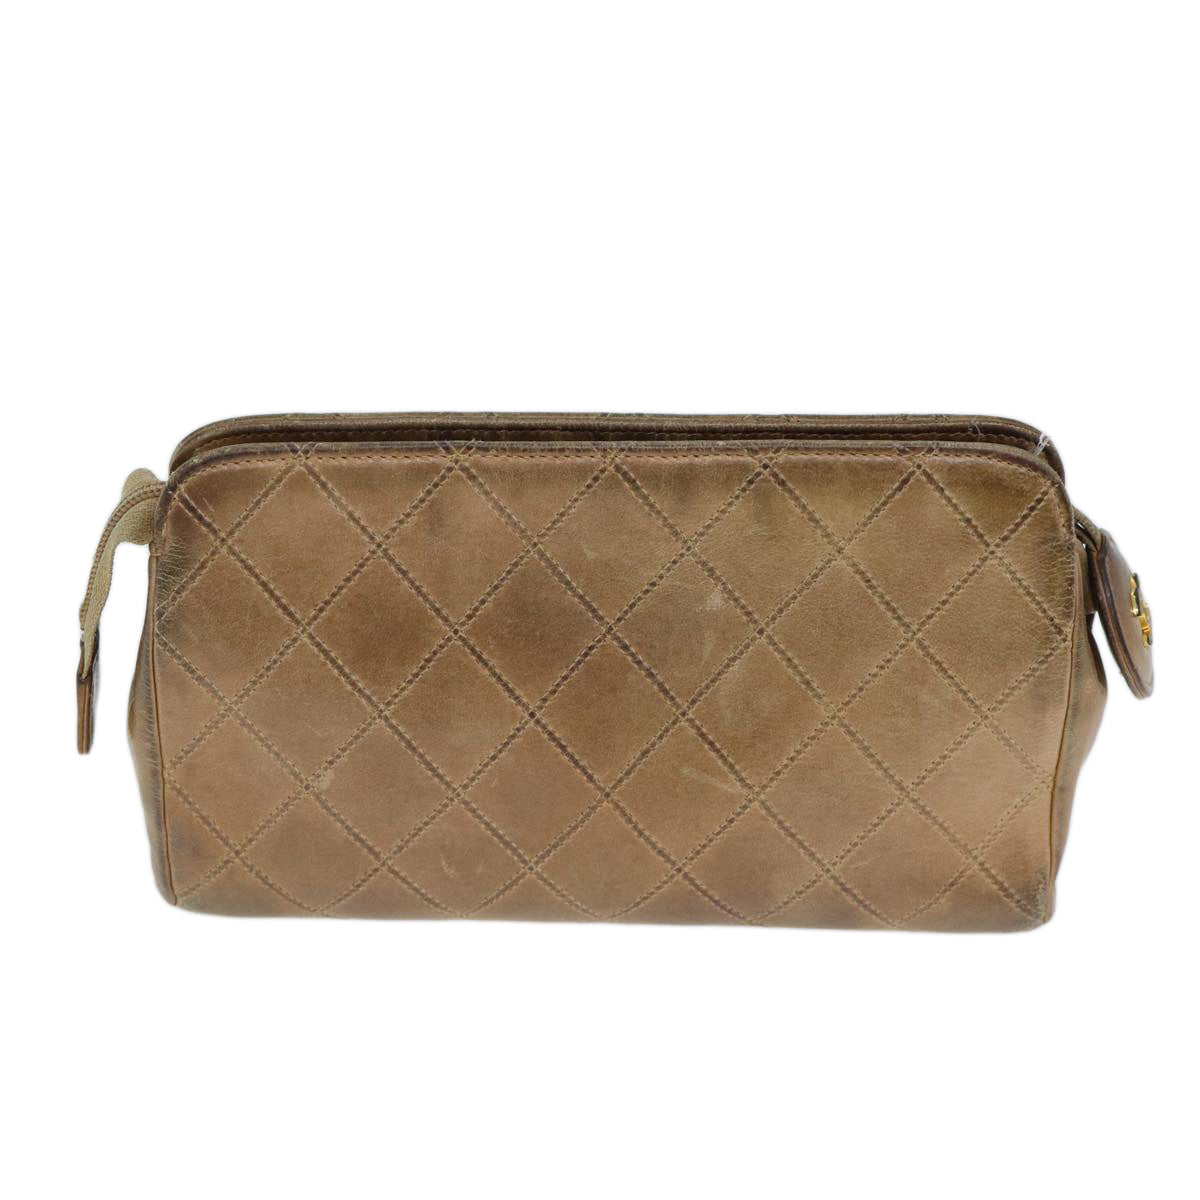 CHANEL Bicolole Pouch Leather Beige CC Auth bs13900